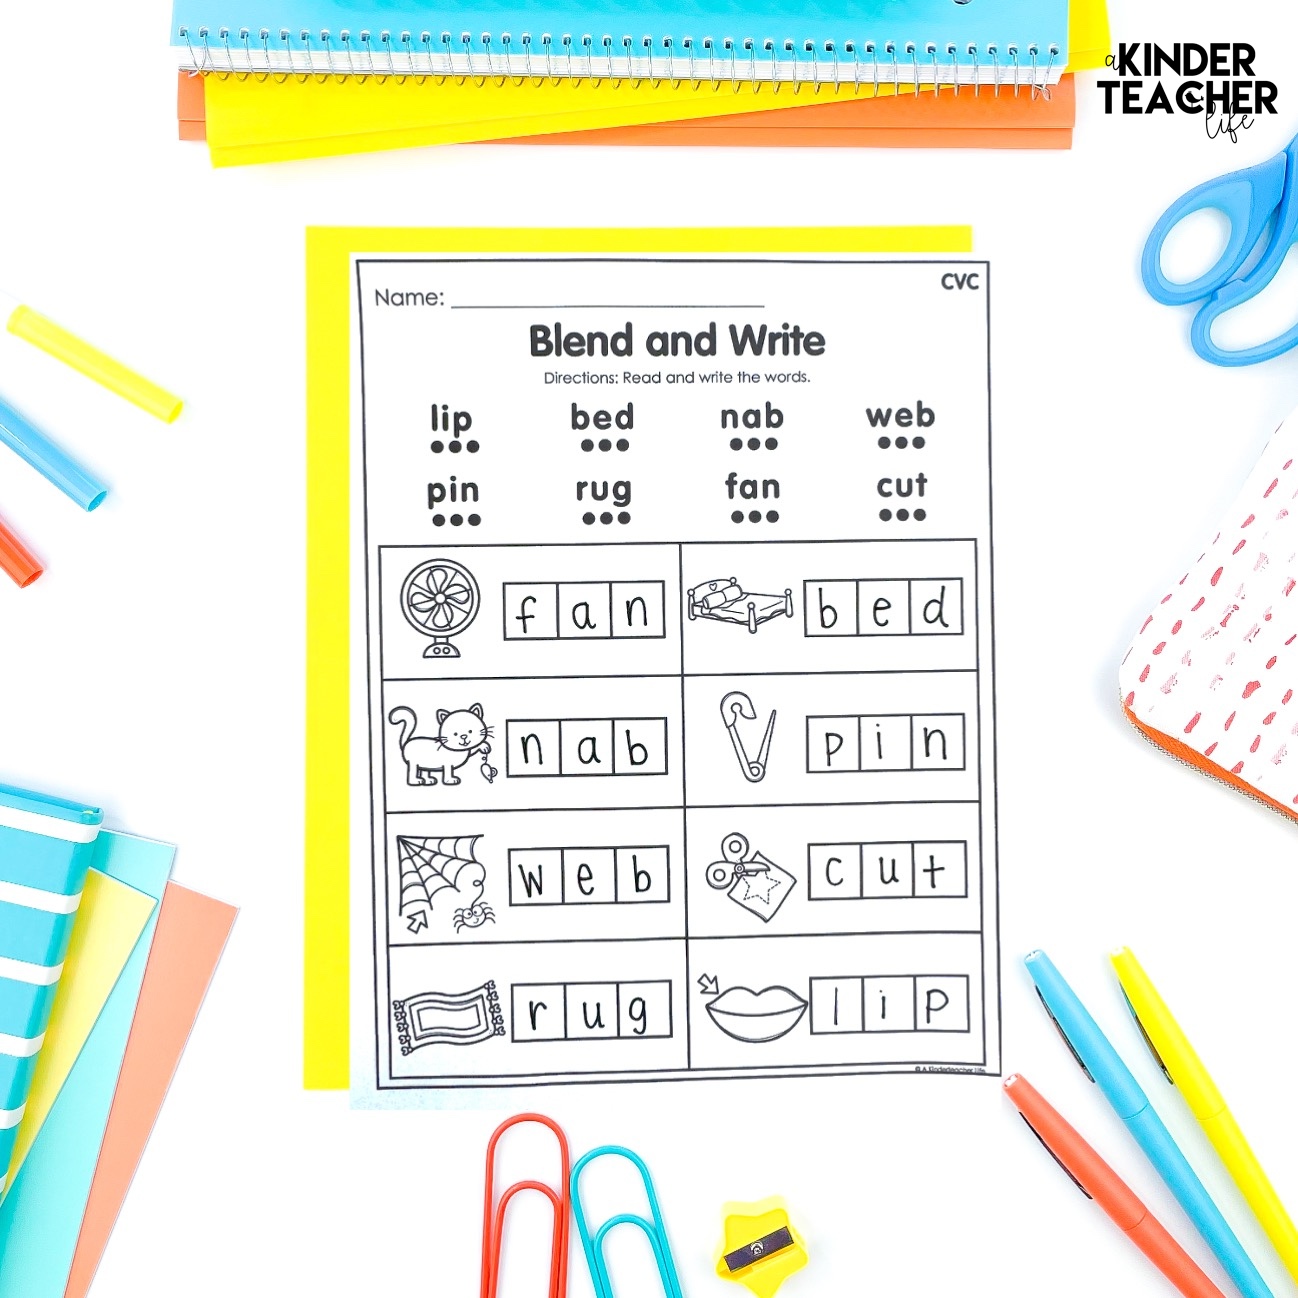 Blend and Write: A New Word Mapping Activity